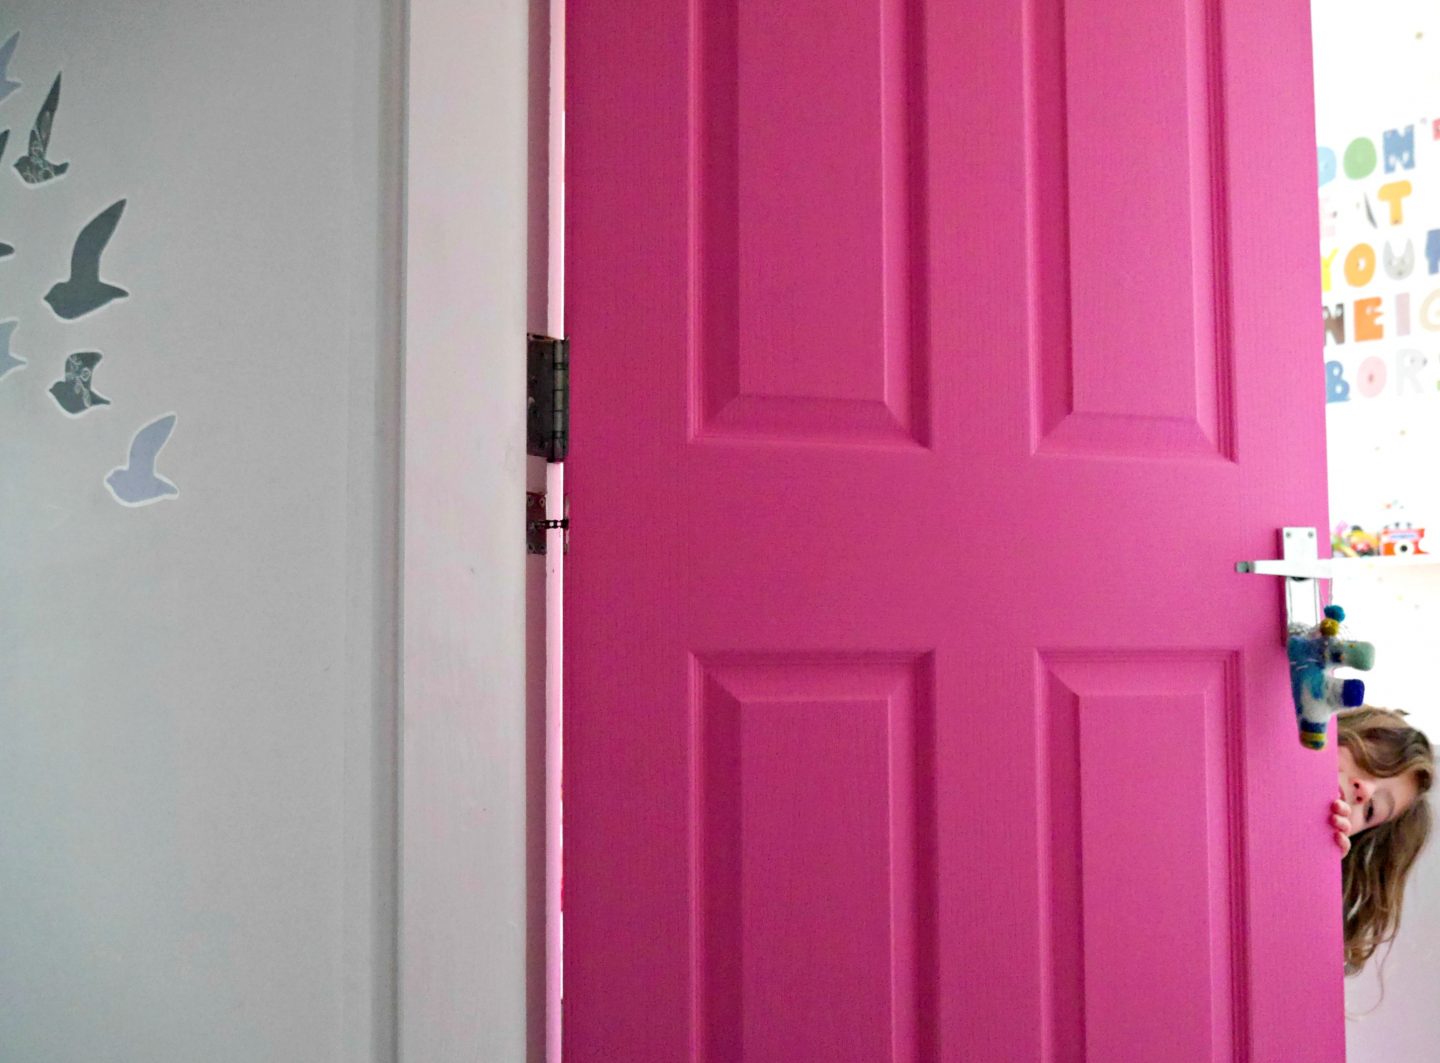 Colourful doors for children's rooms